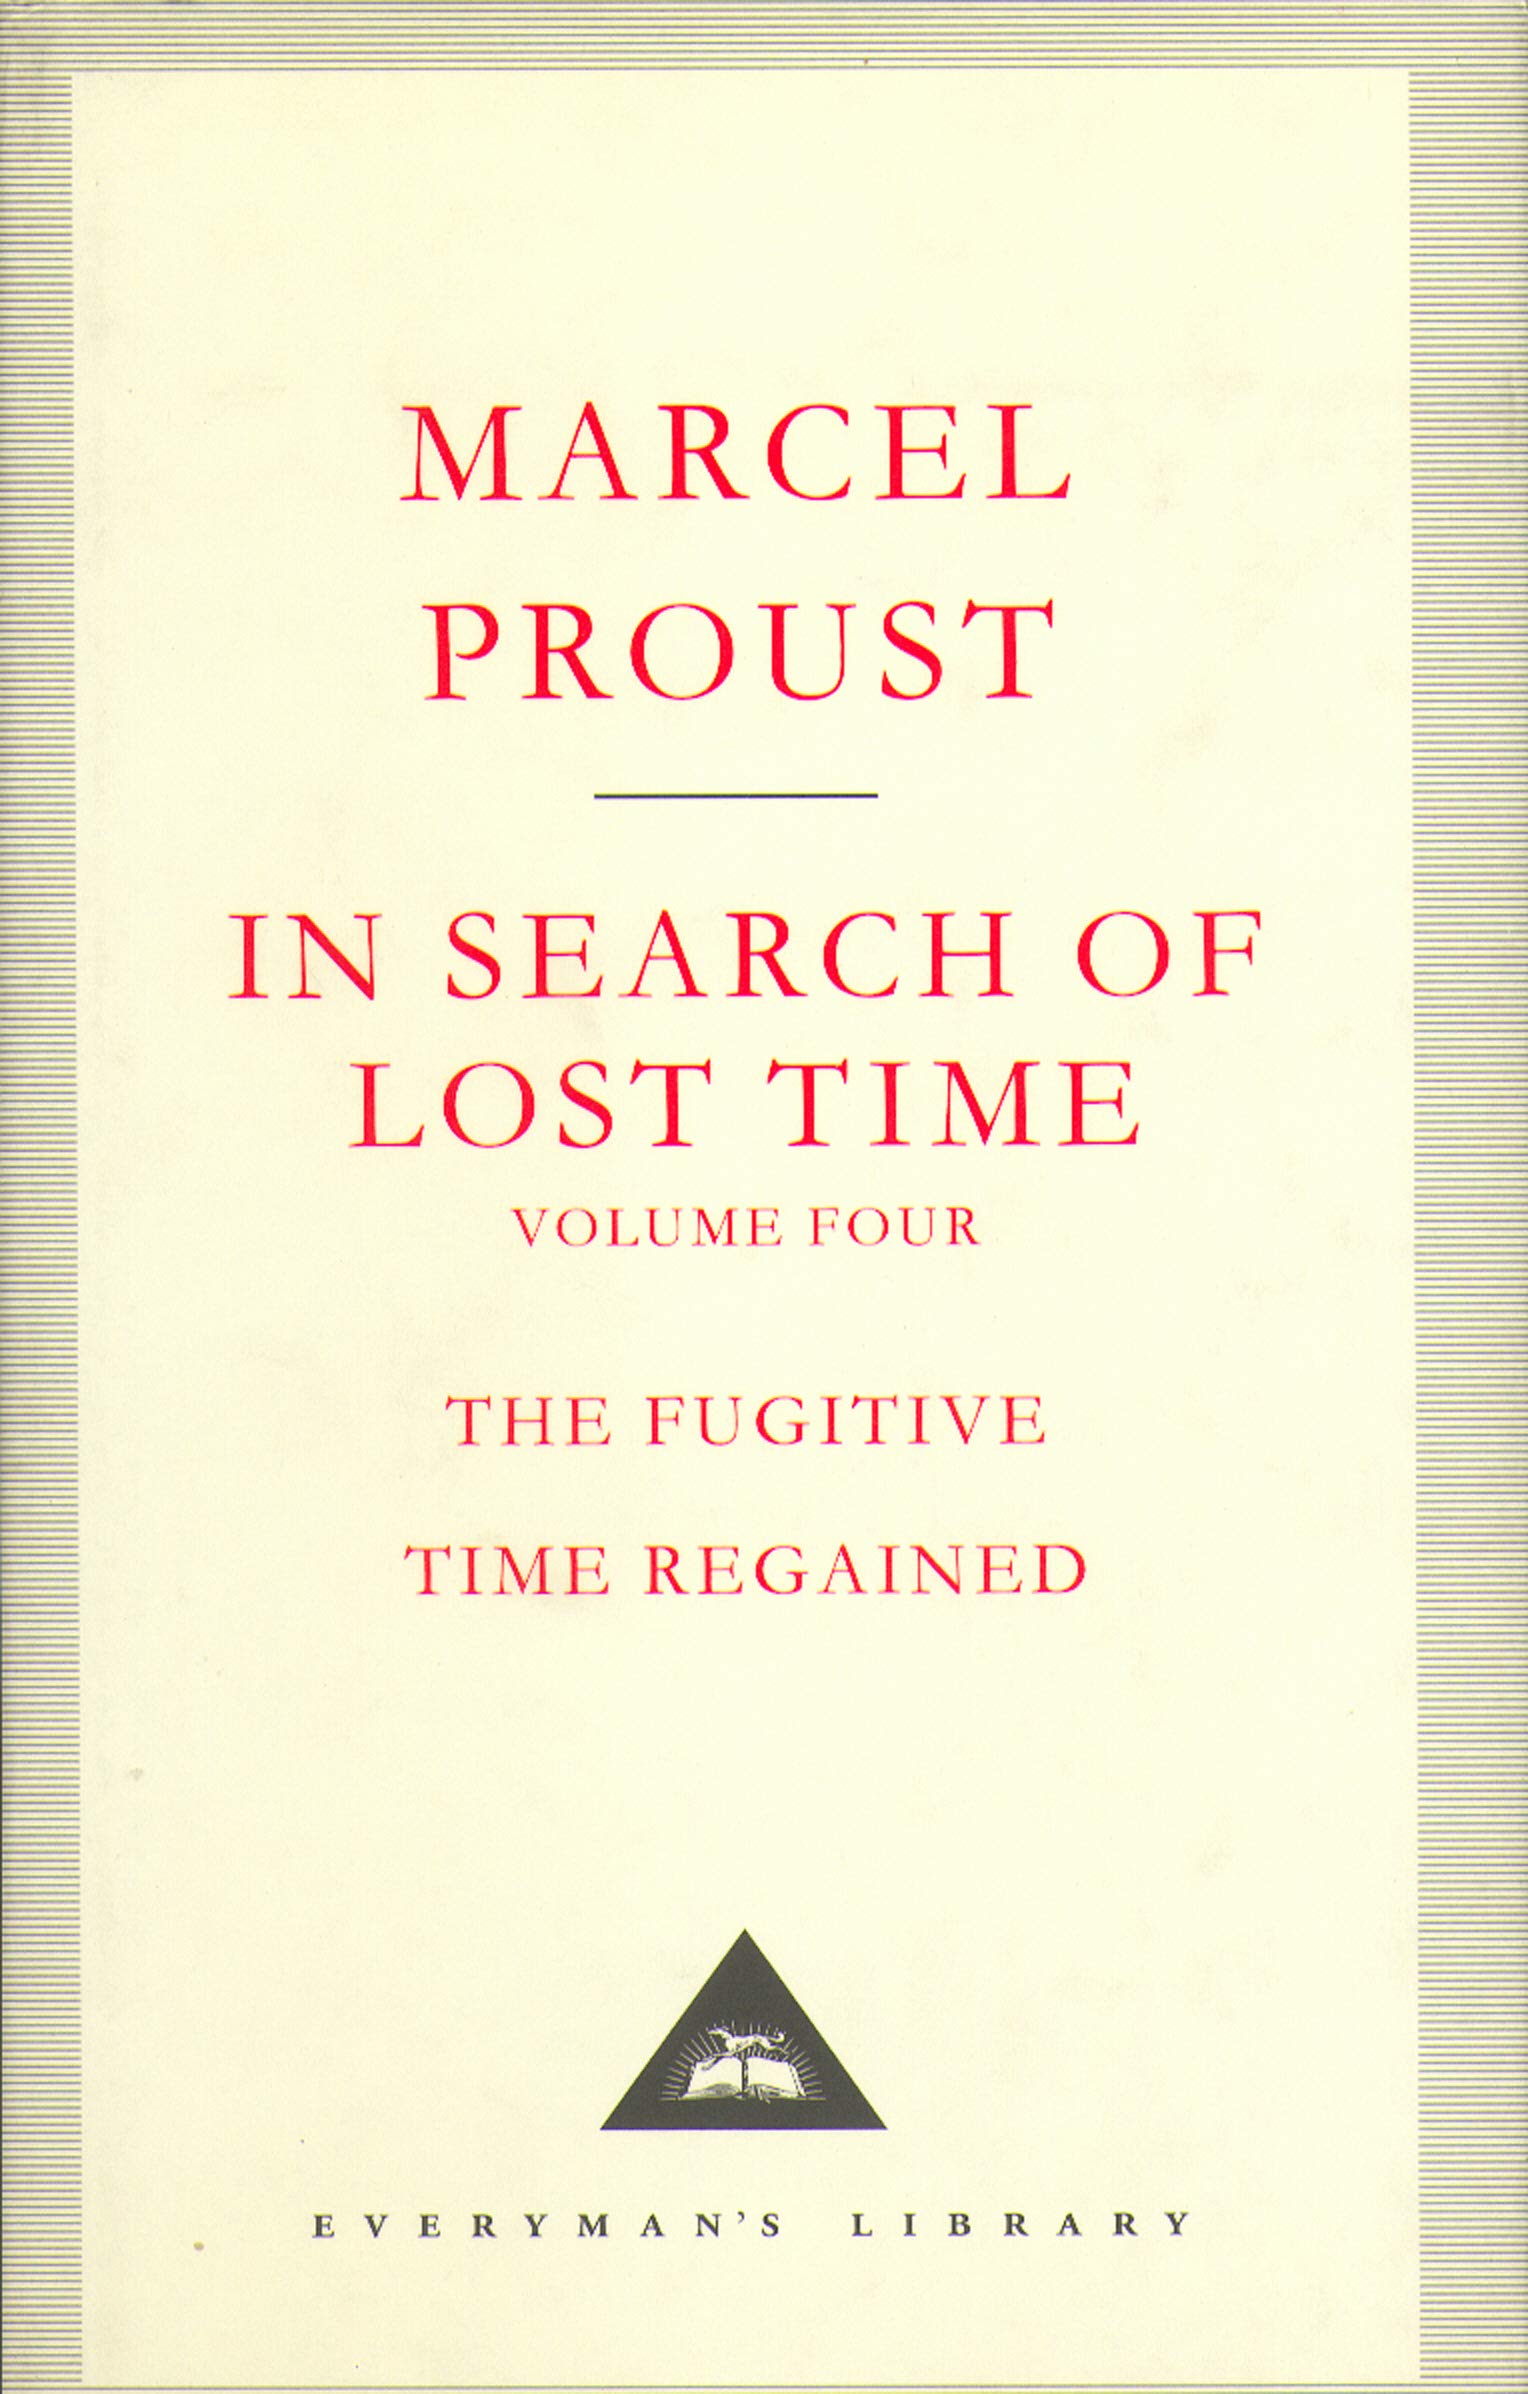 In Search of Lost Time. The Fugitive. Time Regained